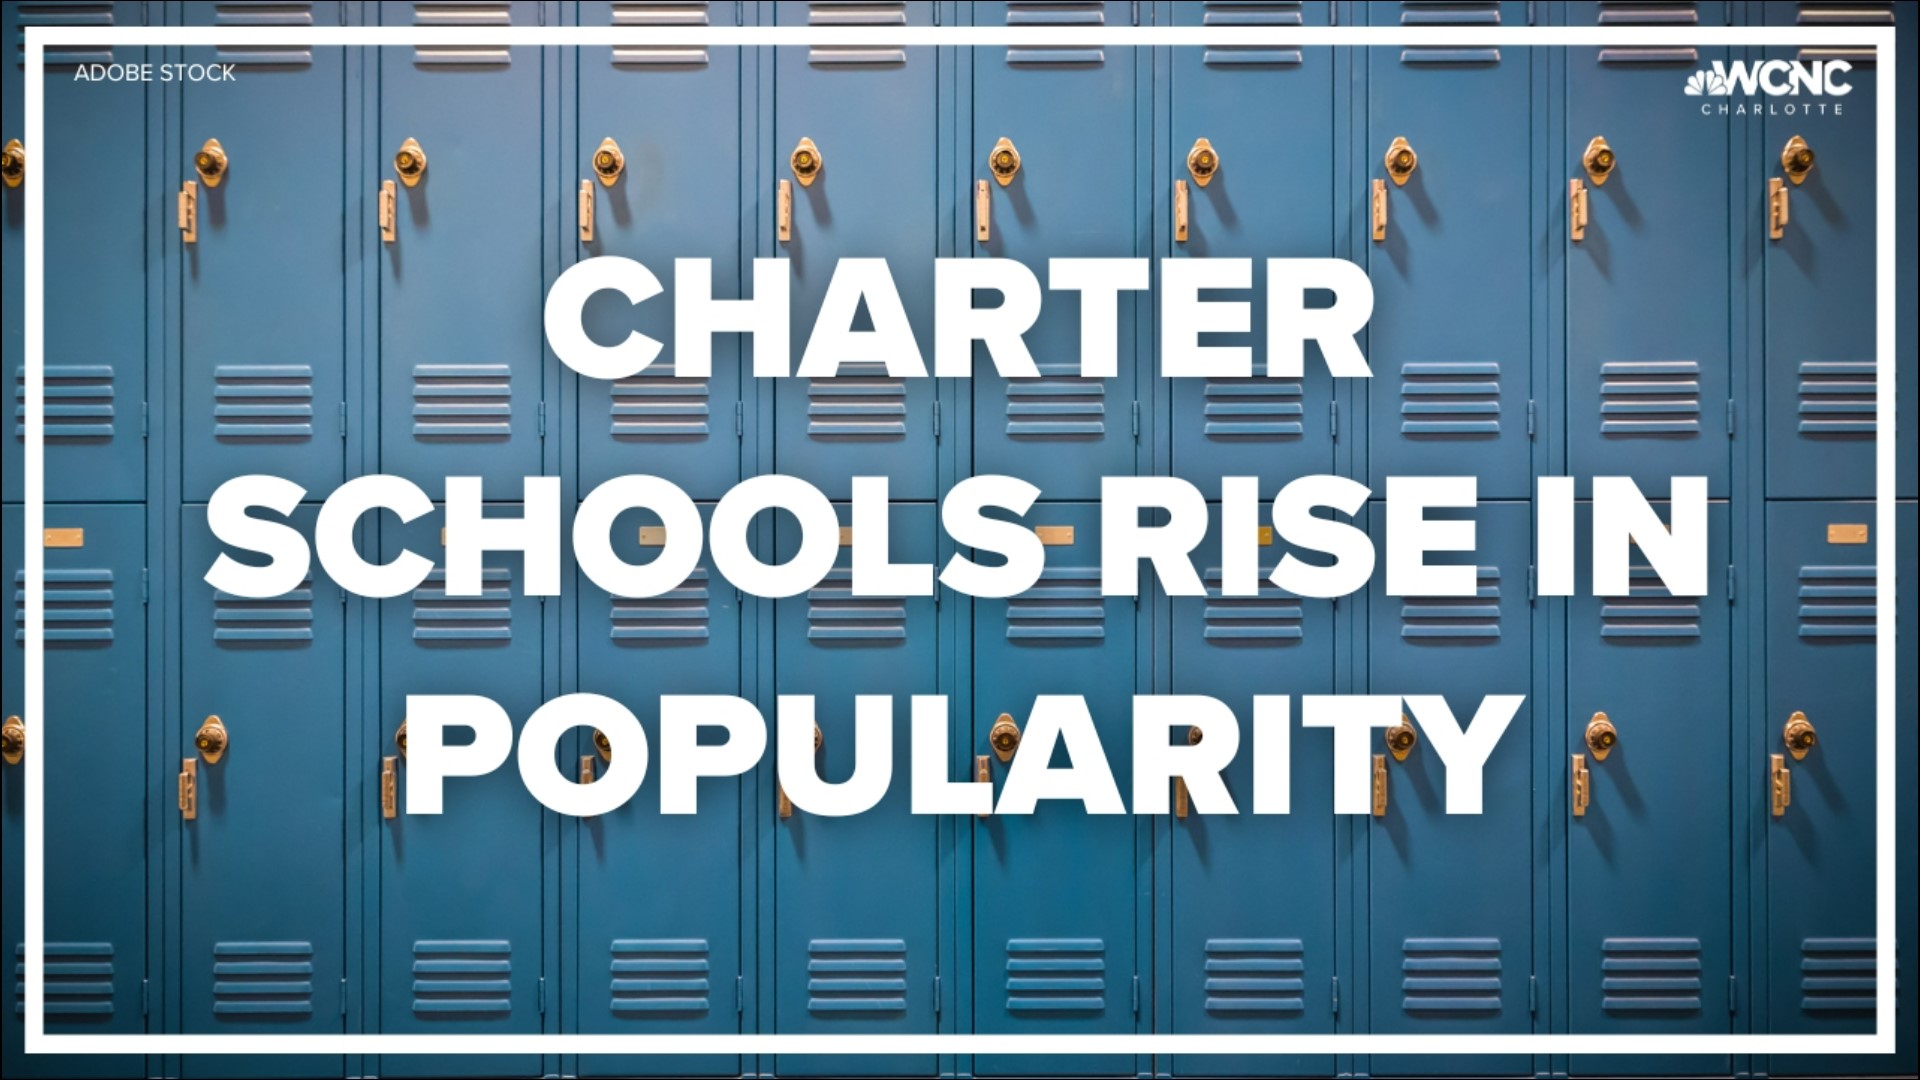 A report by National Alliance for Public Charter Schools shows charter school enrollment continues to increase.